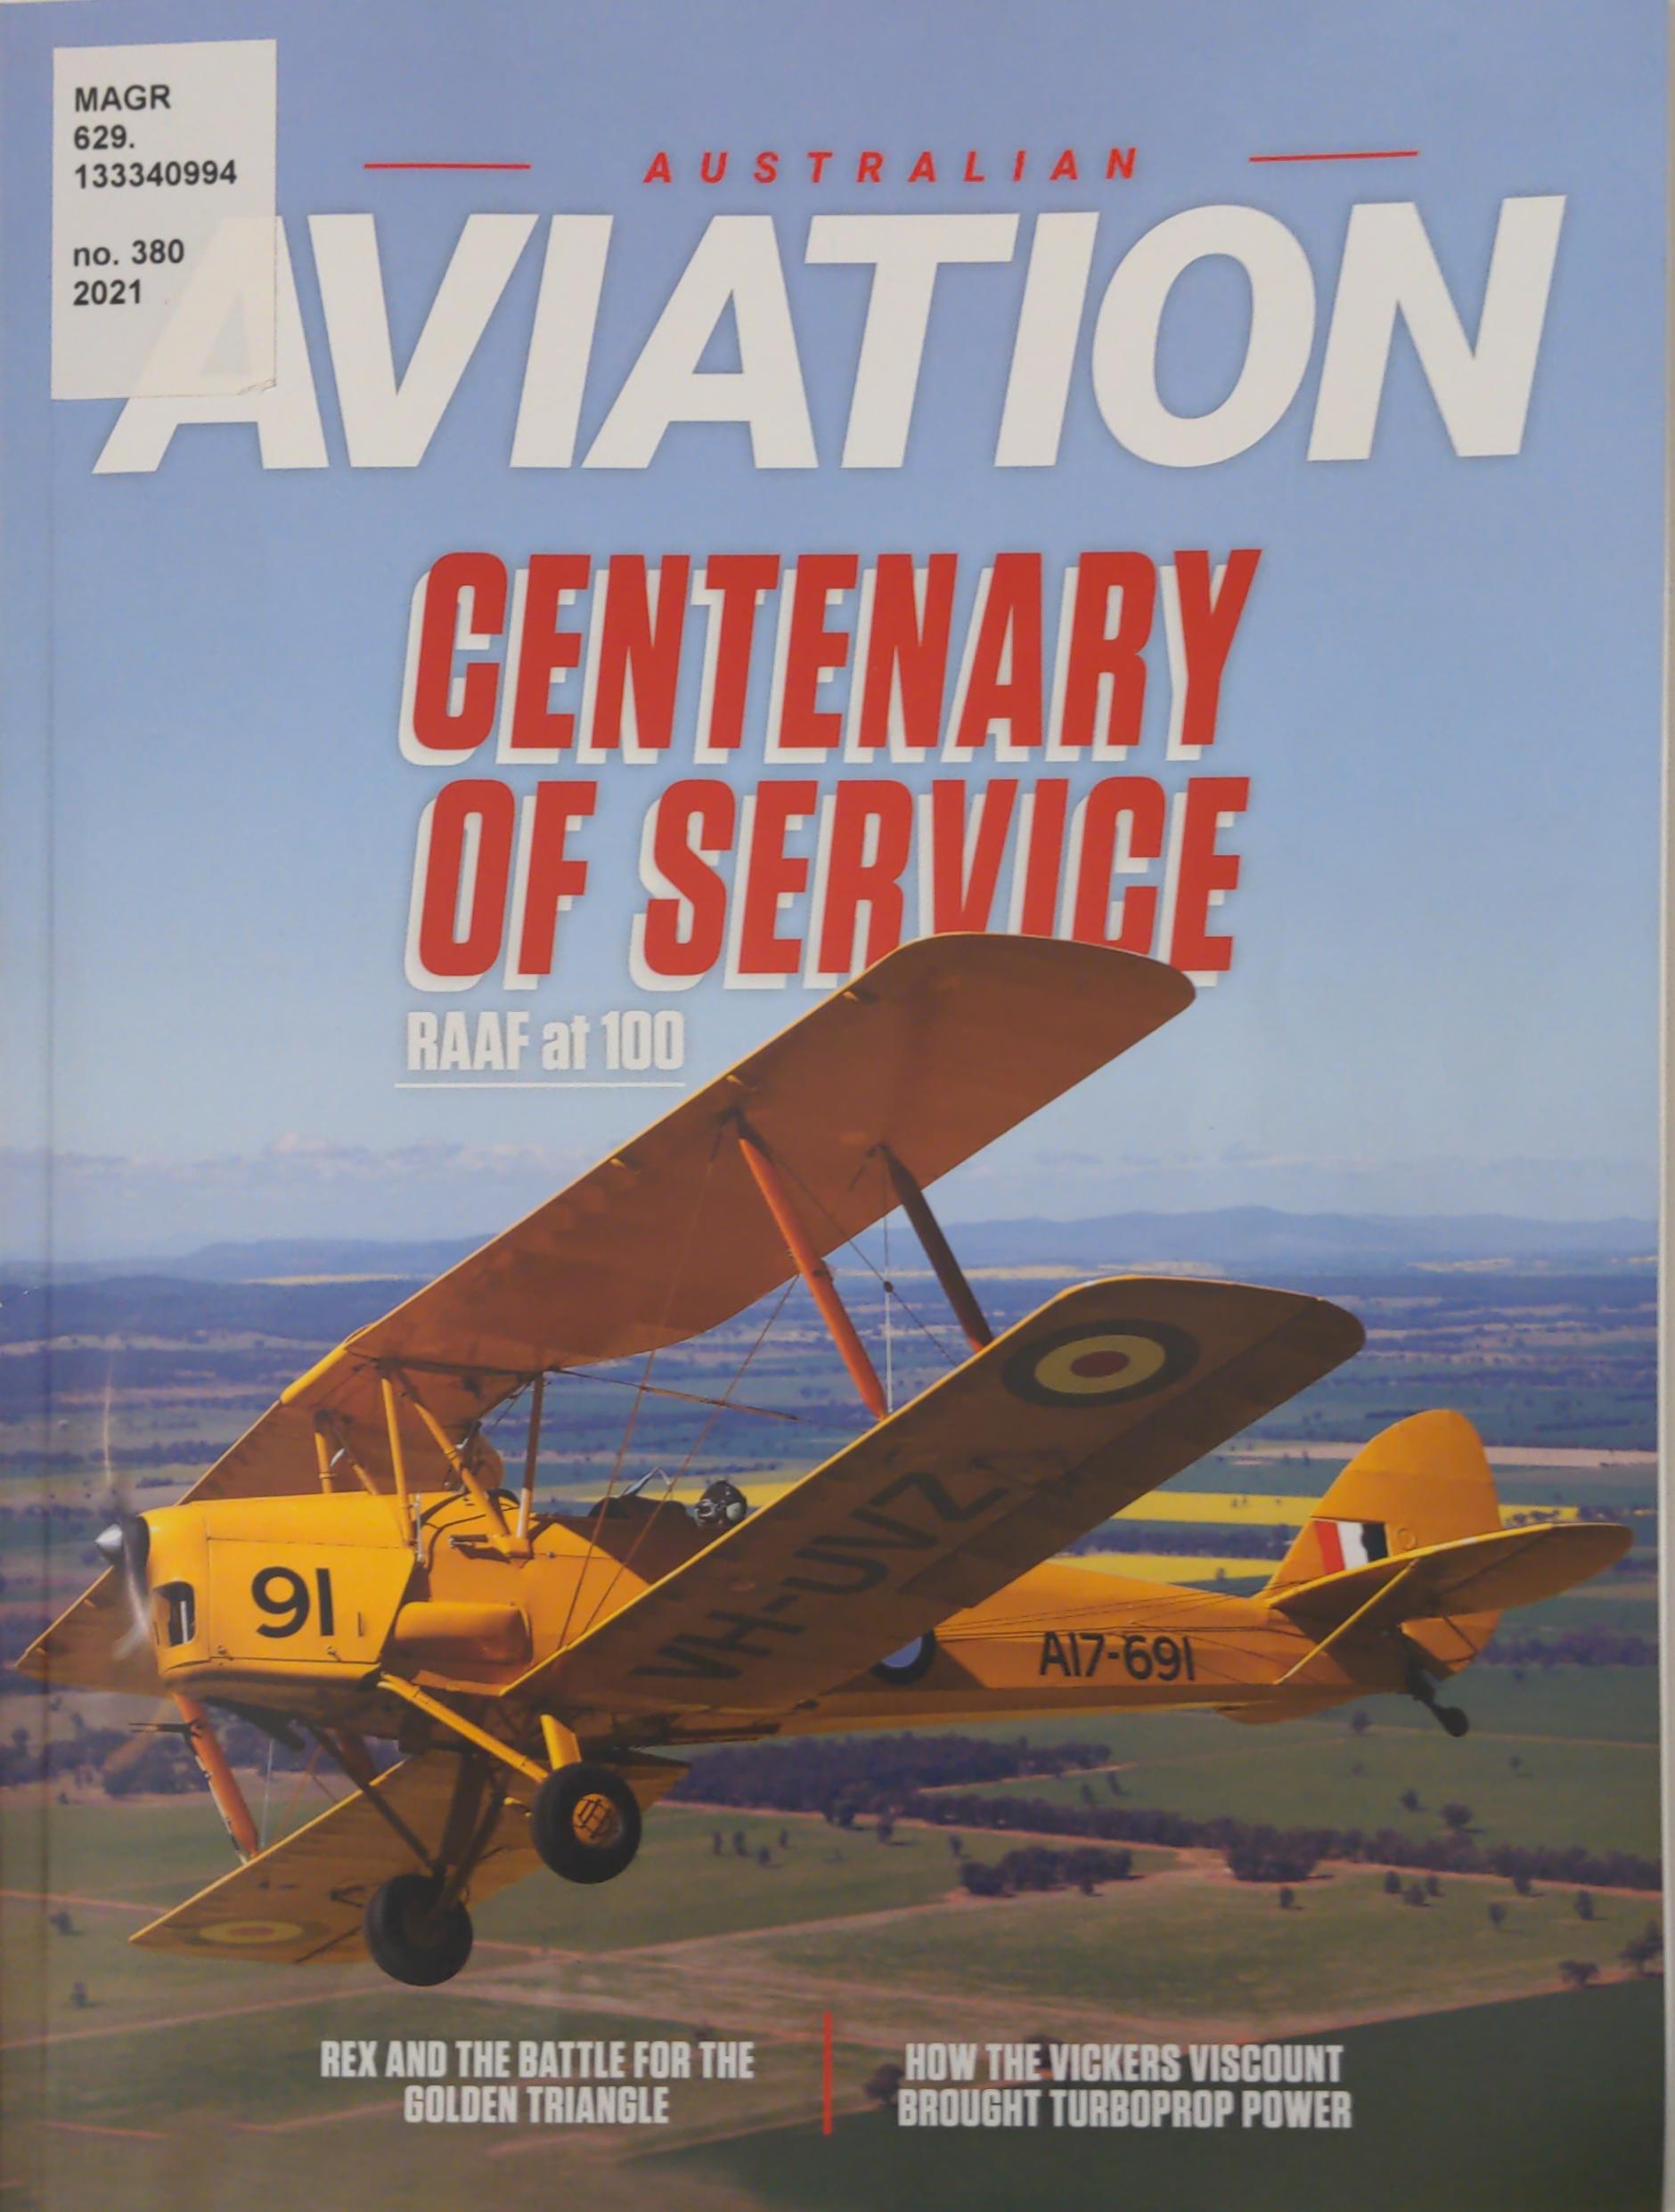 Image of a yellow Tiger Moth (A17-691) on front cover of "Australian Aviation" magazine issue no. 380 2021